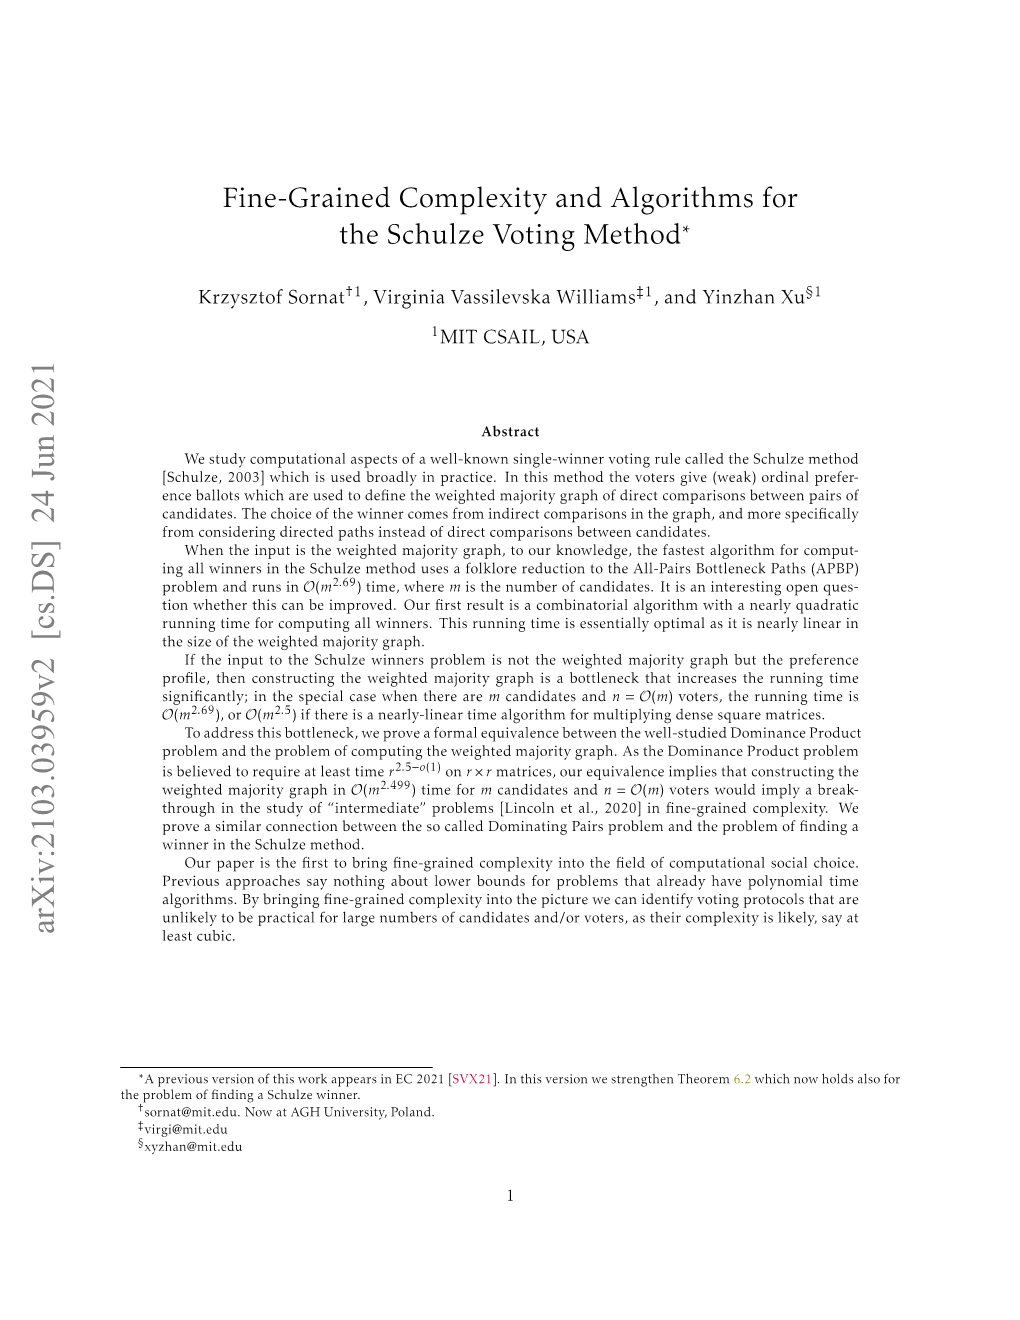 Fine-Grained Complexity and Algorithms for the Schulze Voting Method*